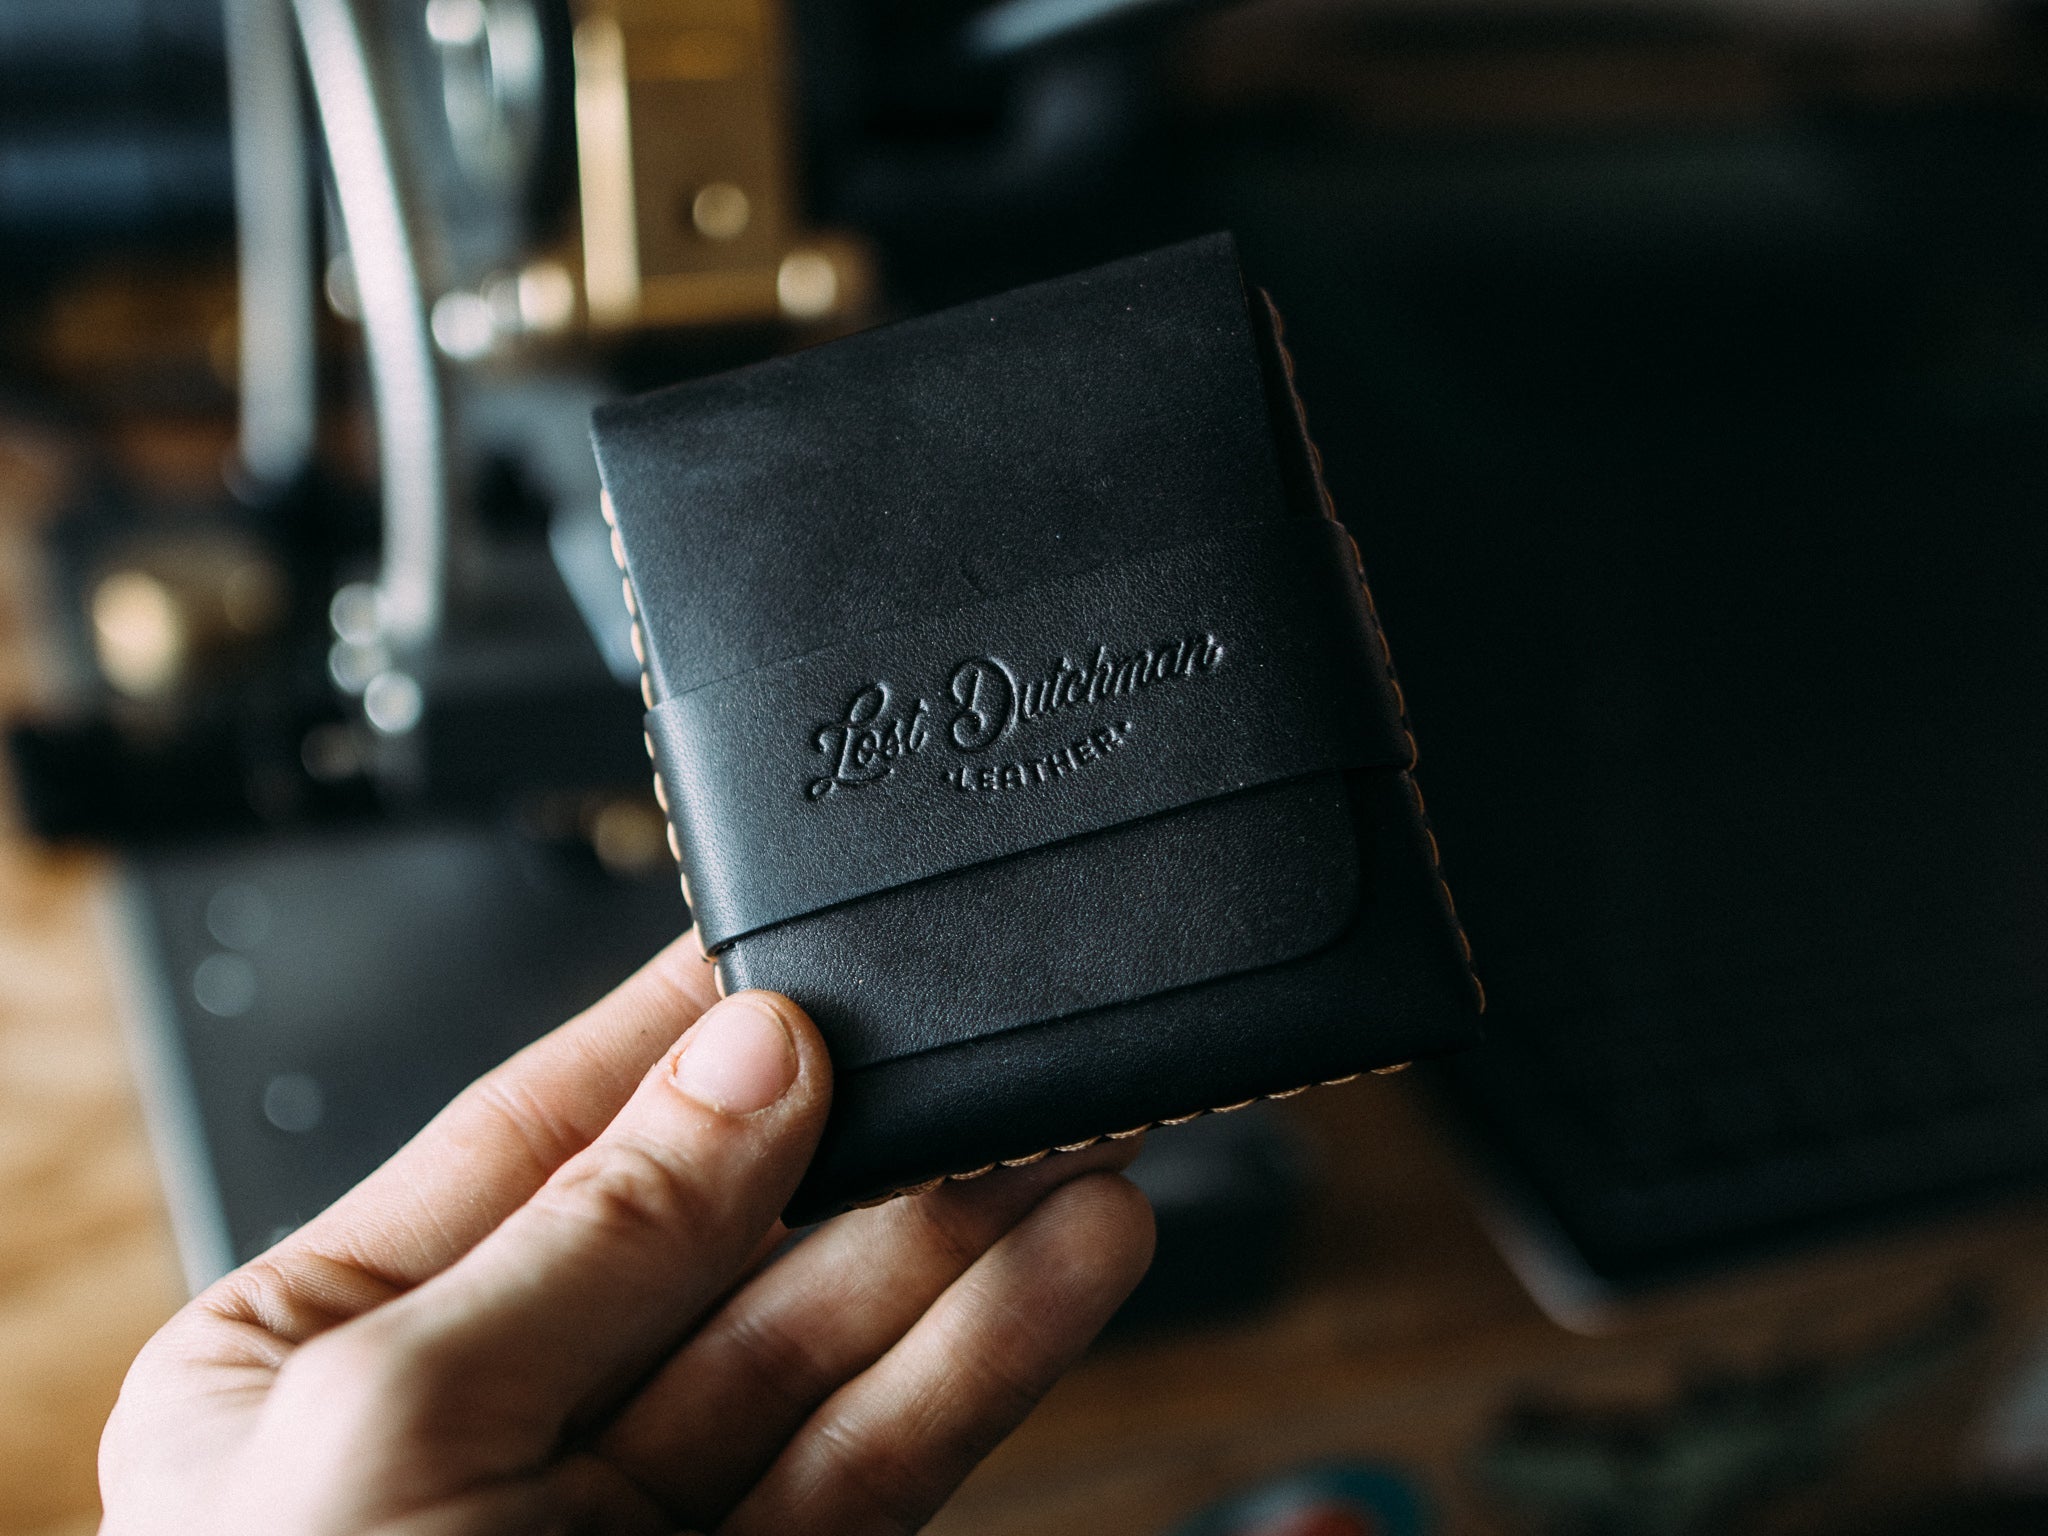 The Big Finn - Lost Dutchman Leather handmade leather wallets